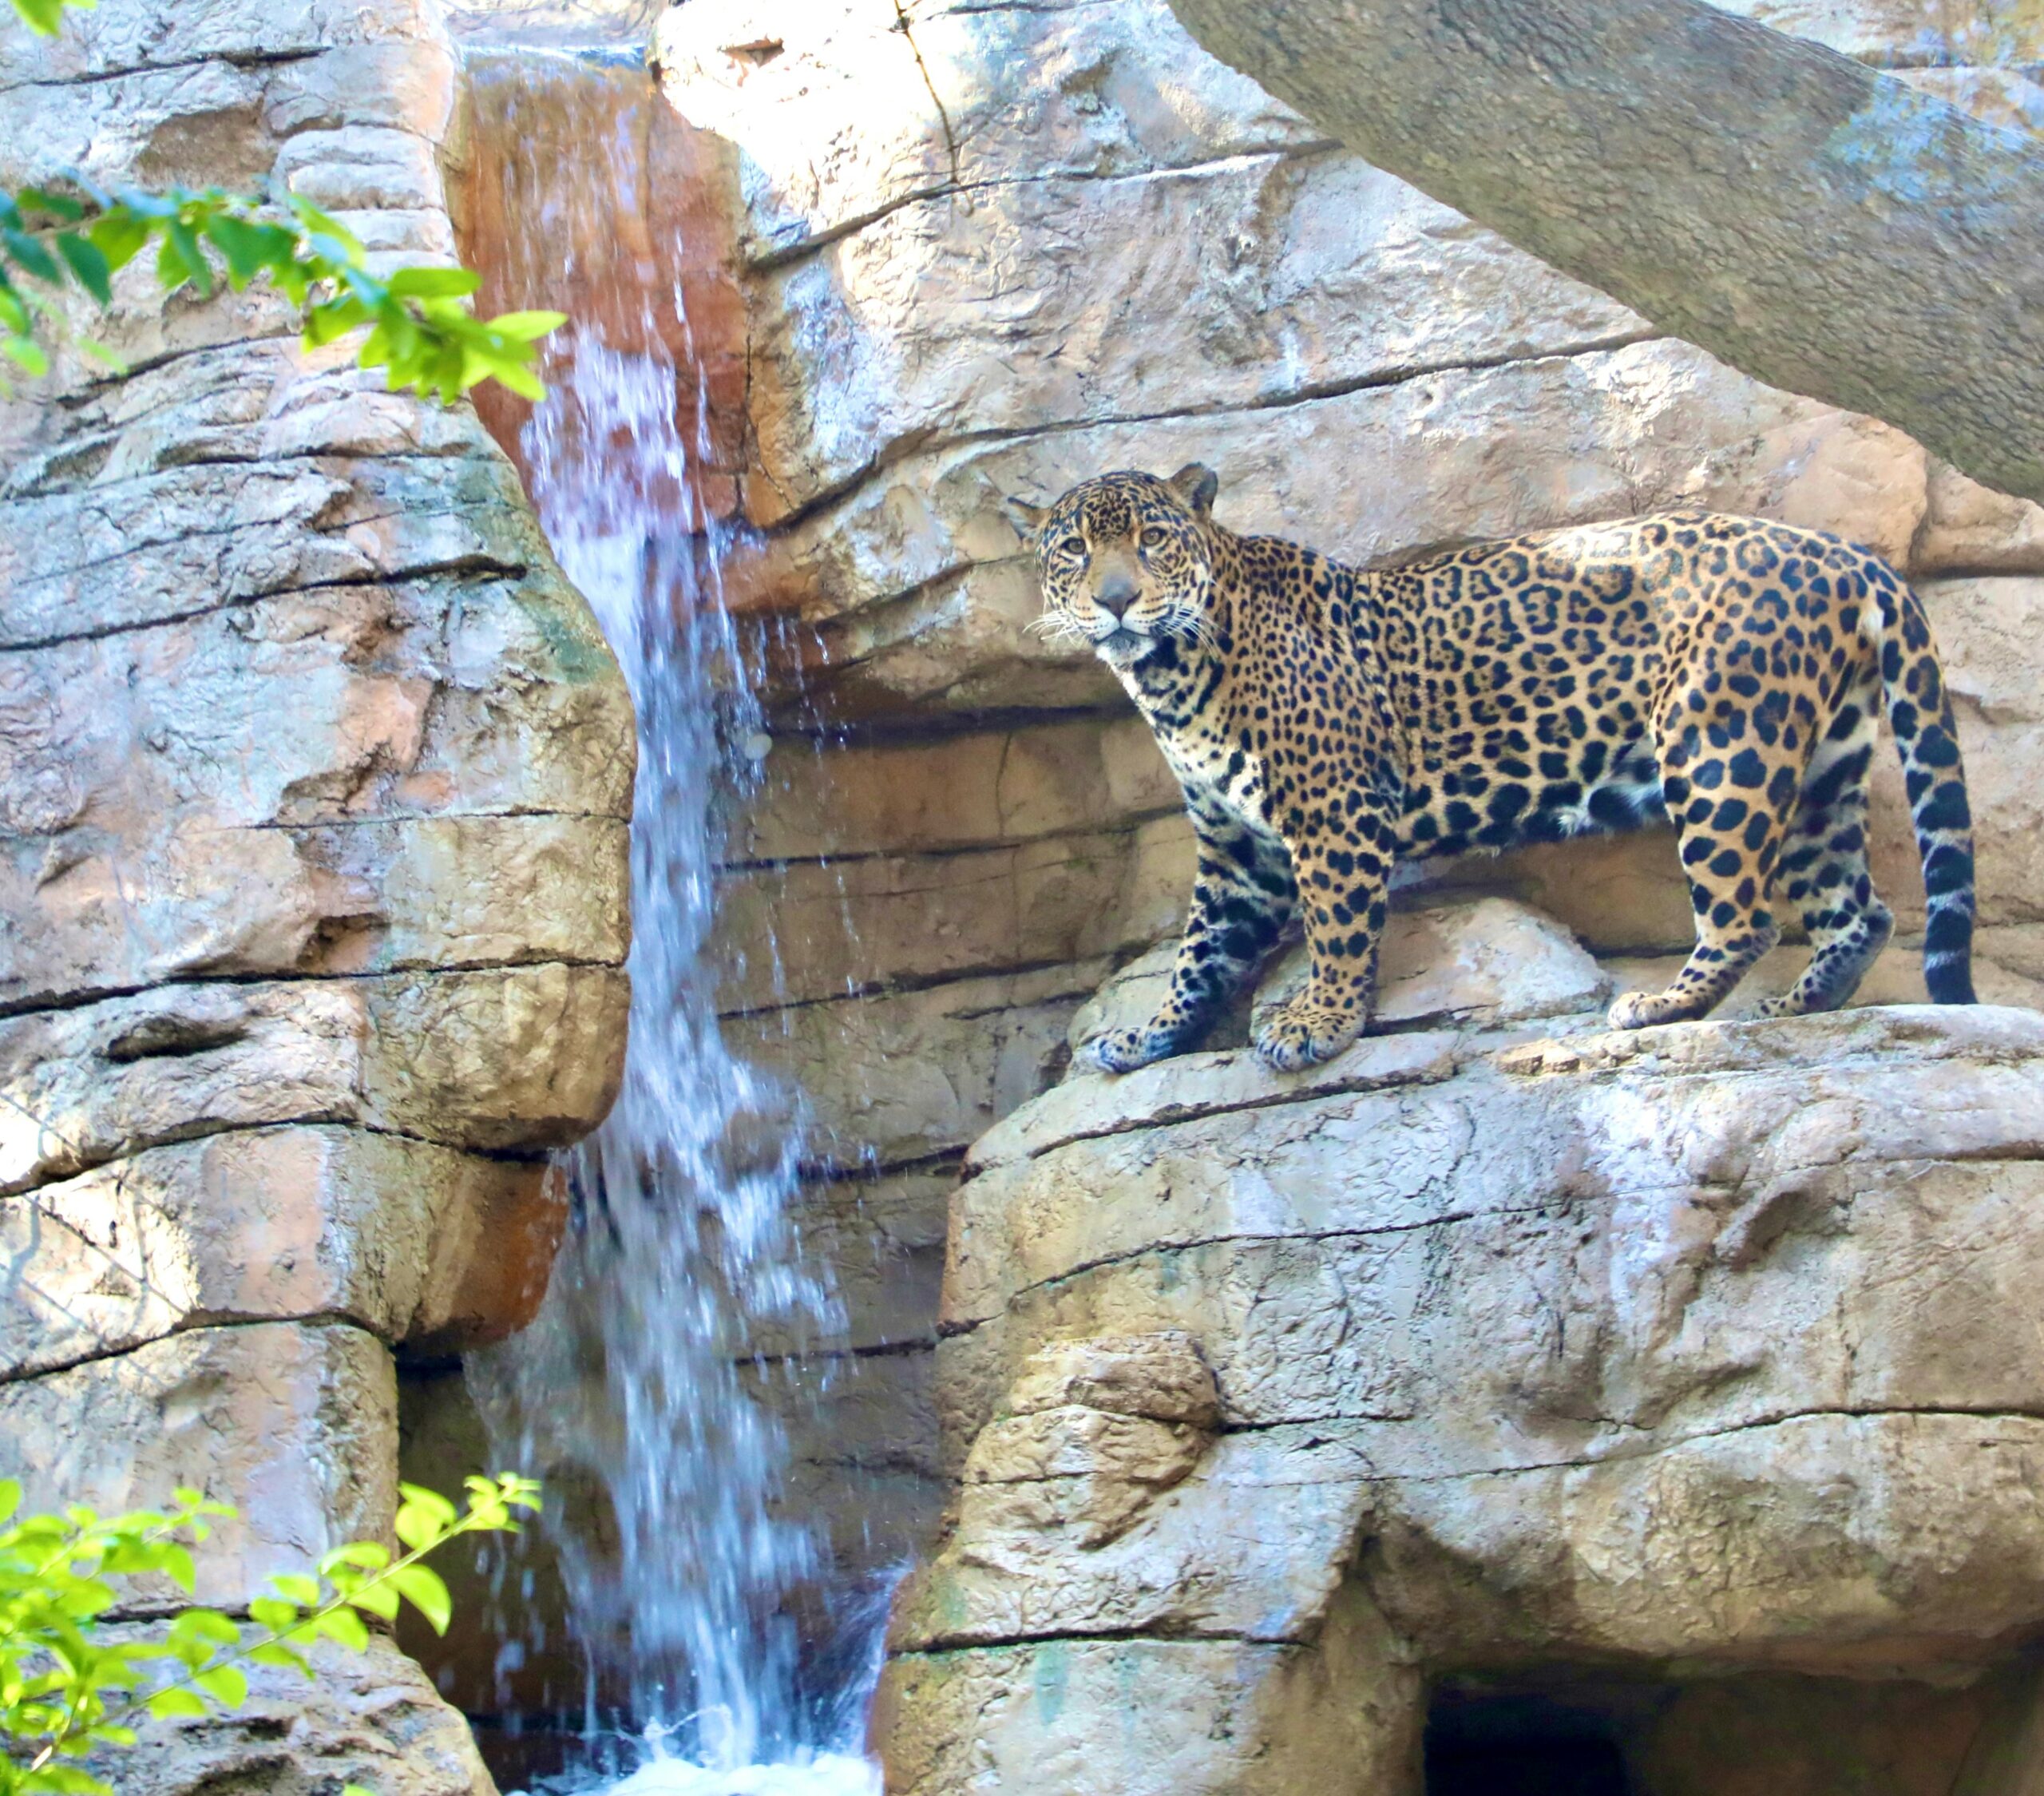 A jaguar in the San Antonio Zoo's Neotropica area, an immersive realm, recreates the feel of a remote South American fishing village.